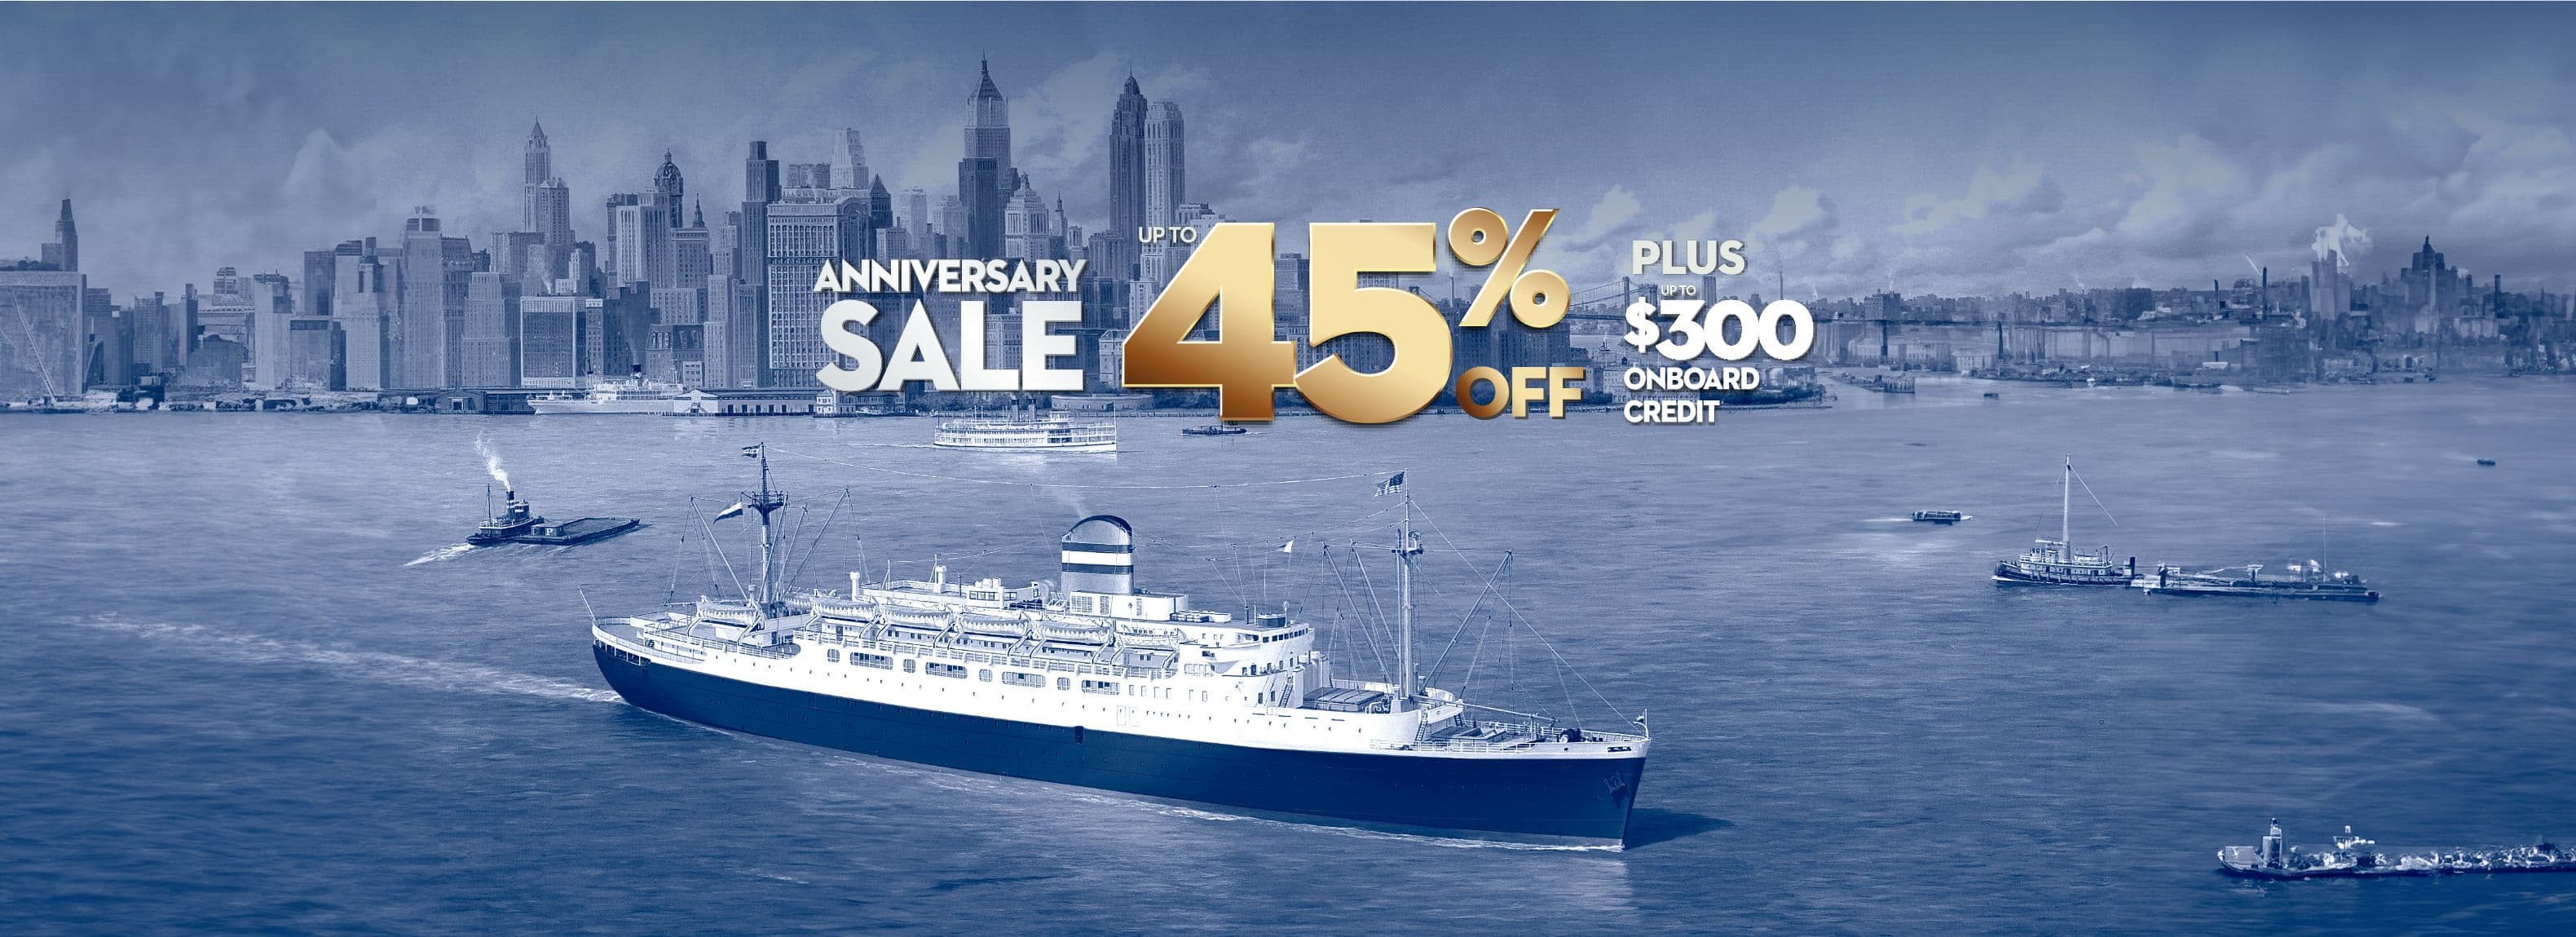 Anniversary Sale Up To 45% Off Plus Up To $300 Onboard Credit